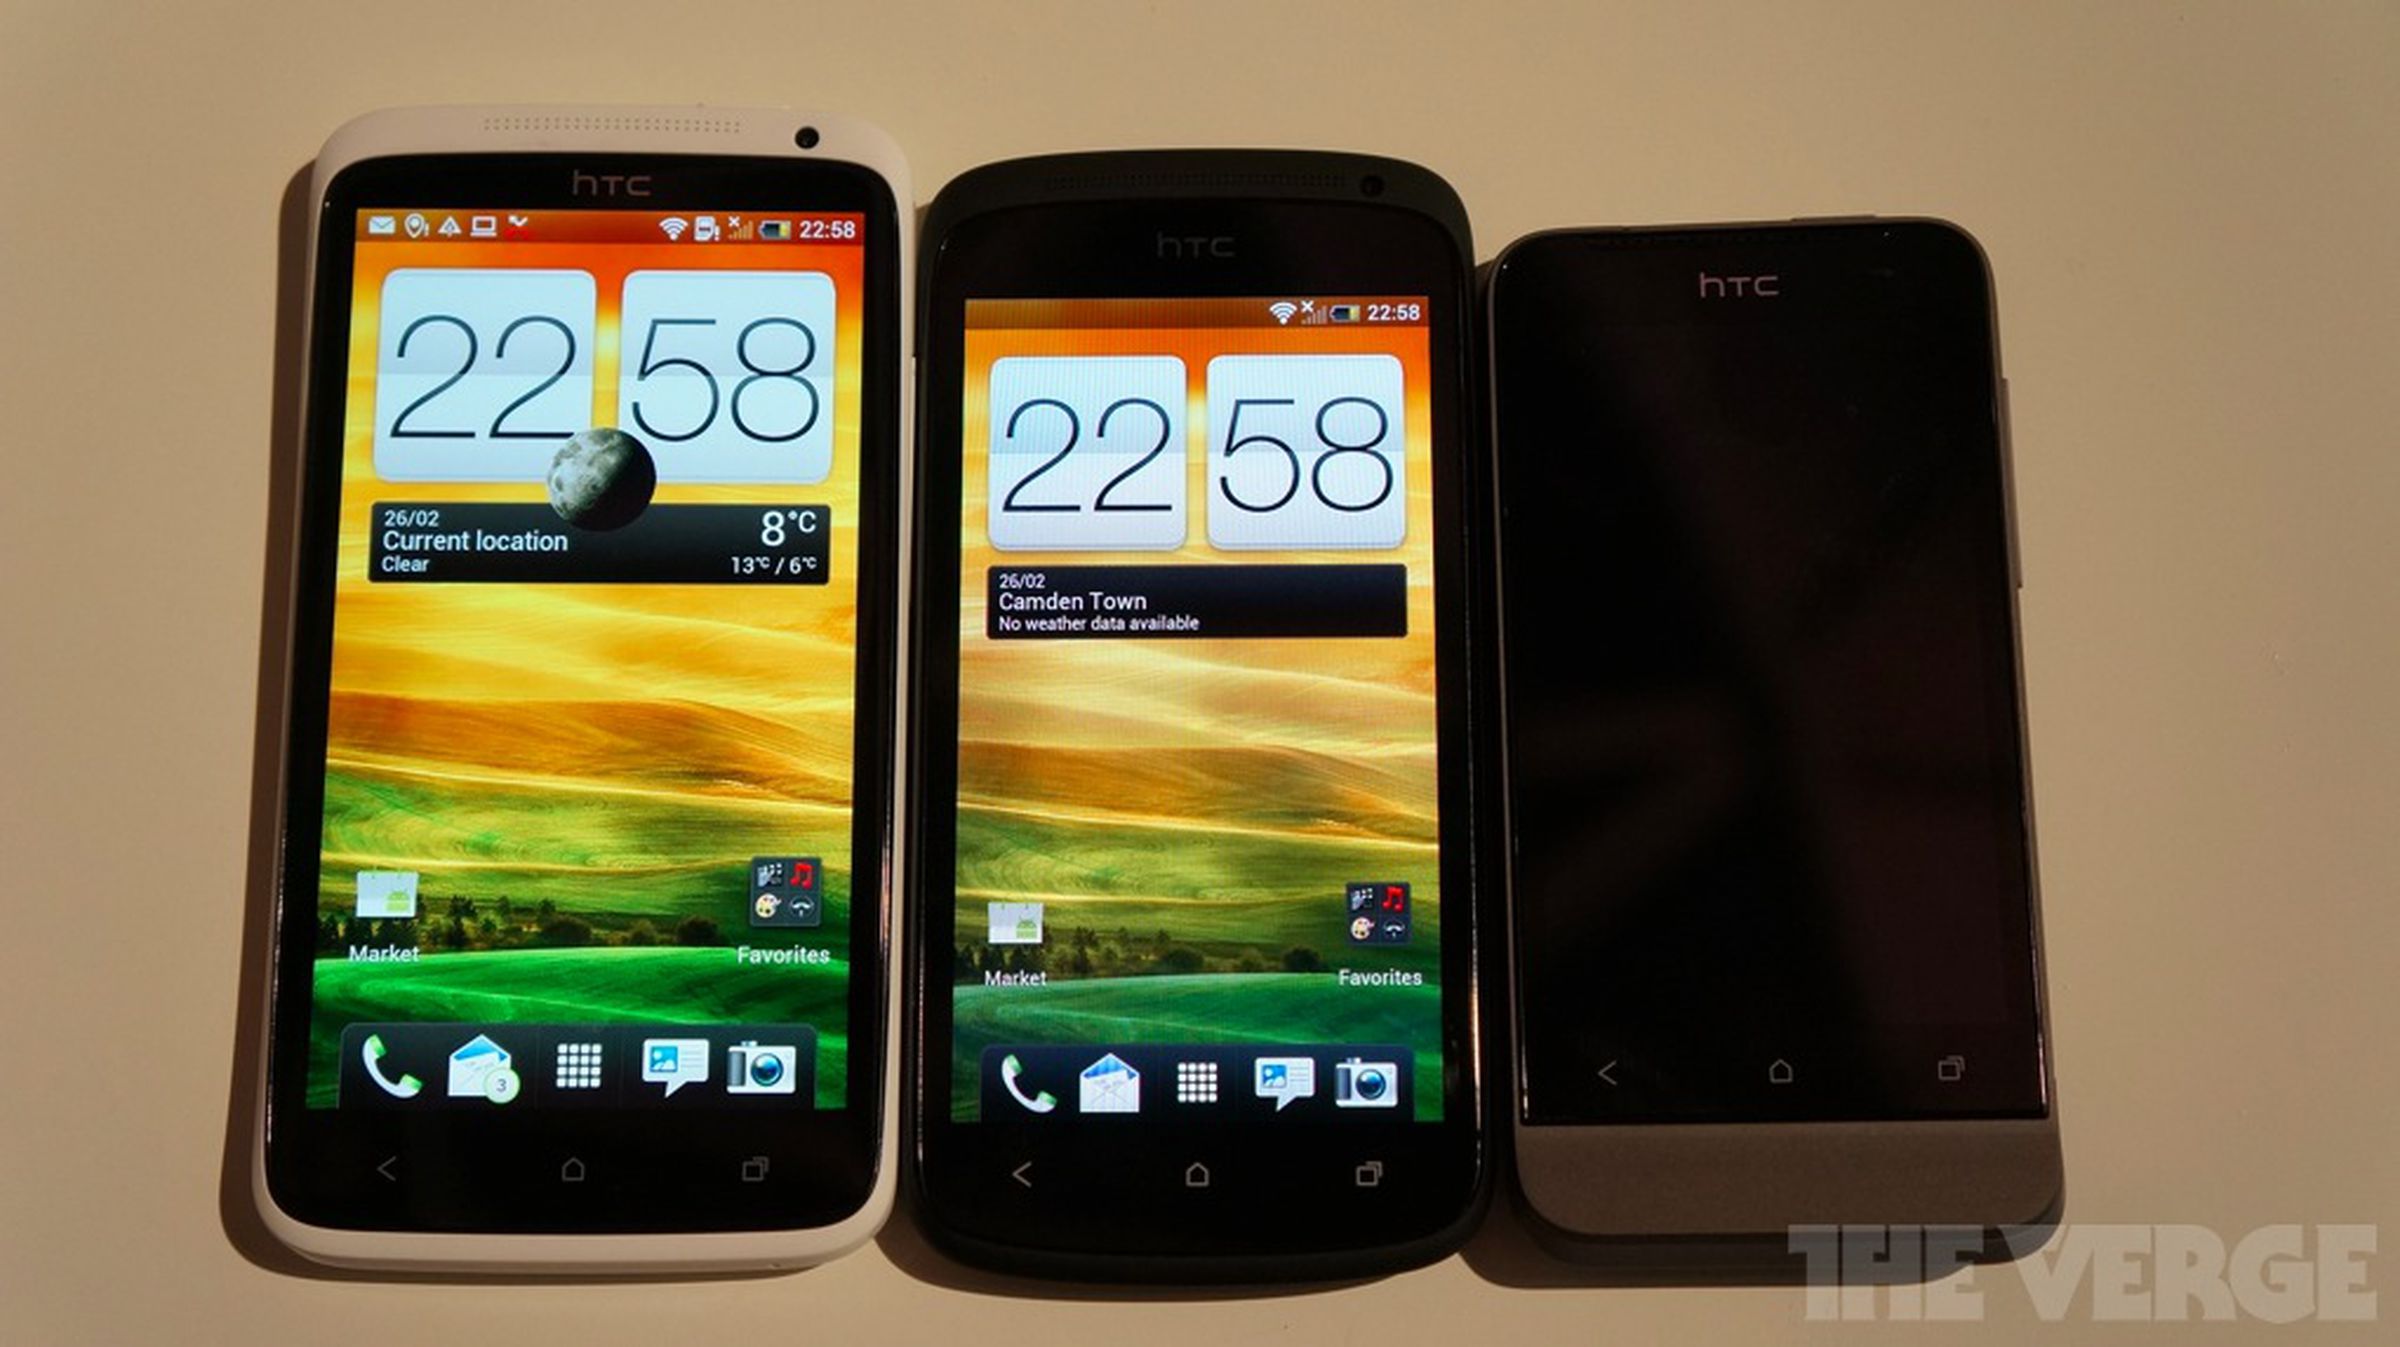 HTC One Series hands-on photos